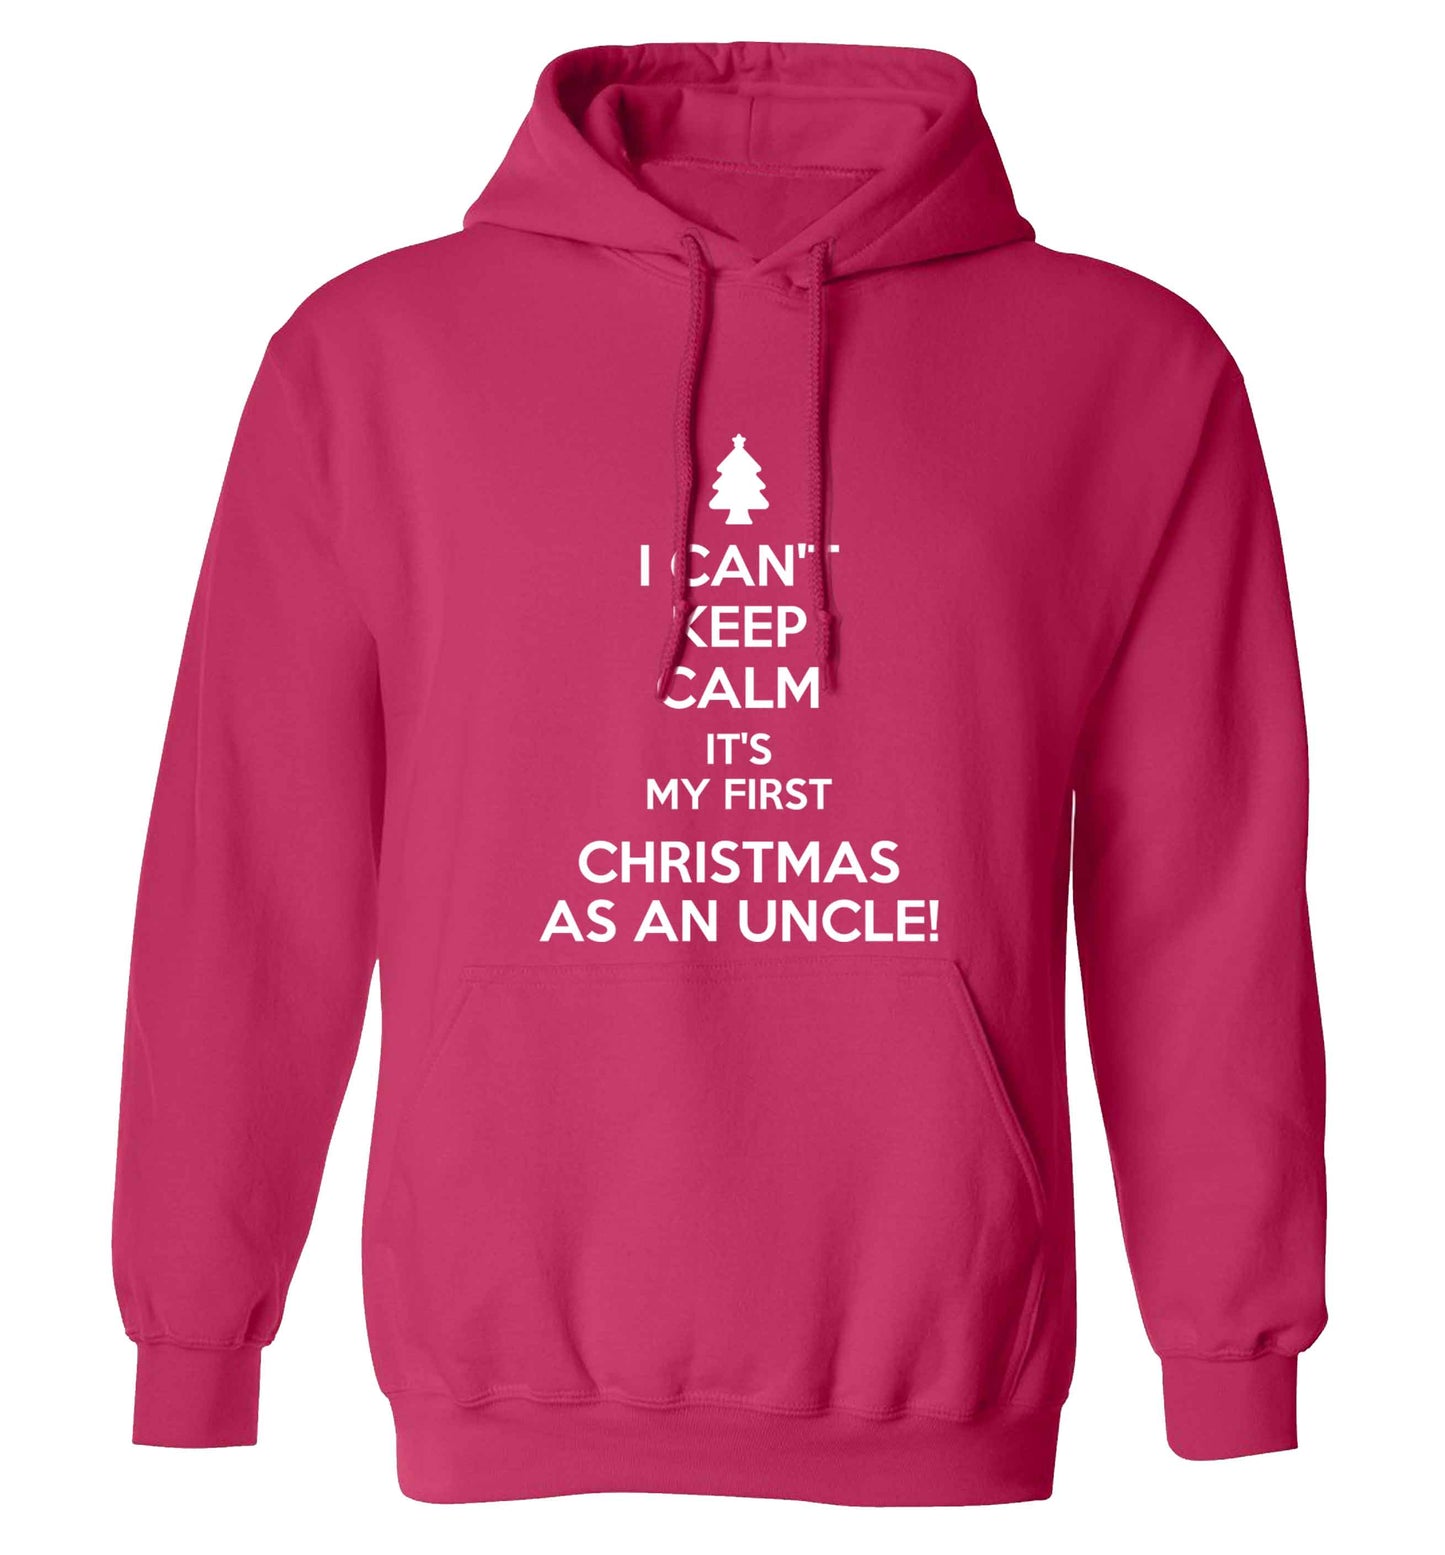 I can't keep calm it's my first Christmas as an uncle! adults unisex pink hoodie 2XL